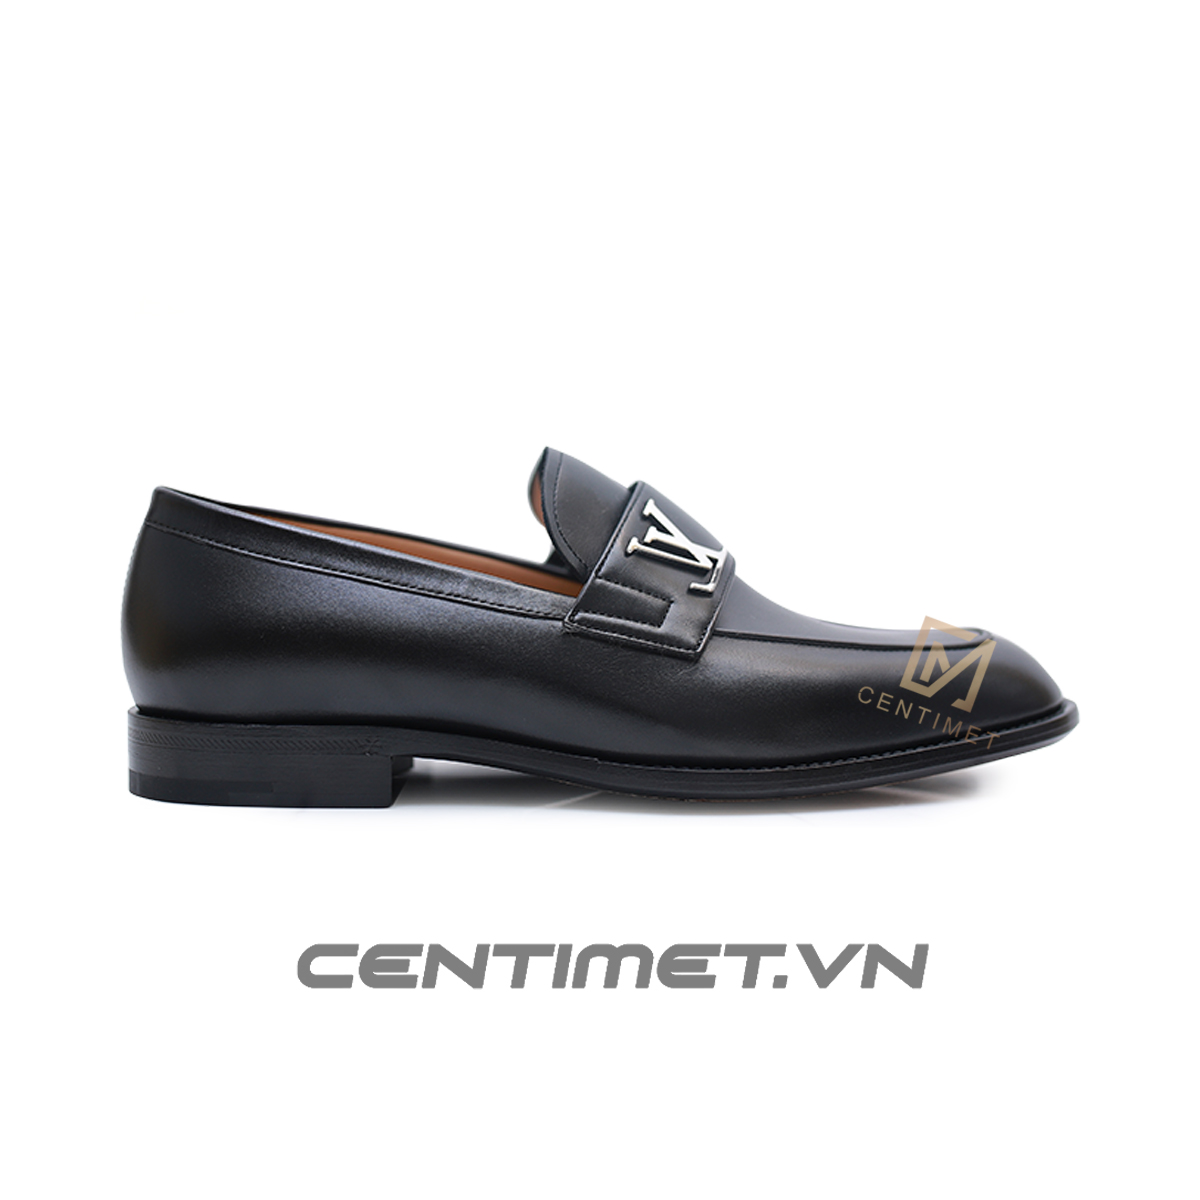 Saint Germain Loafer - OBSOLETES DO NOT TOUCH 1A32W7